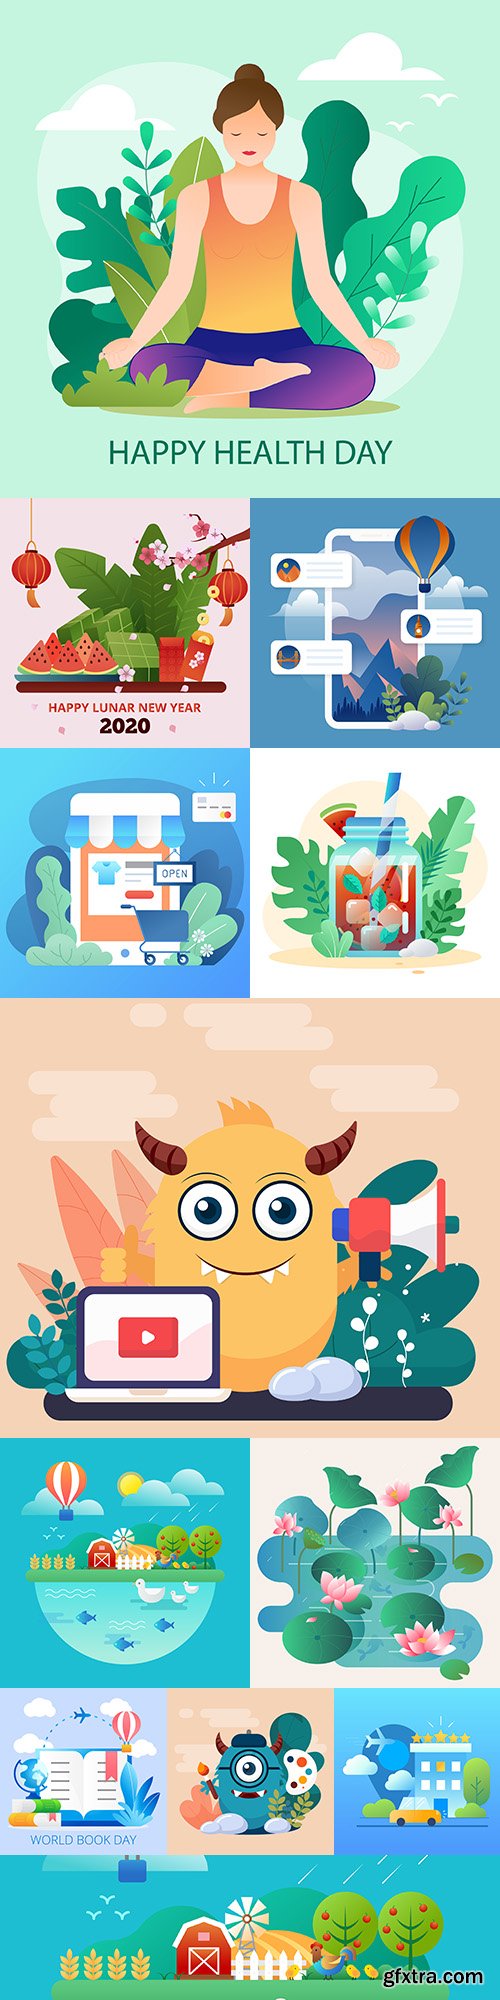 Lifestyle and technology collection flat design illustration